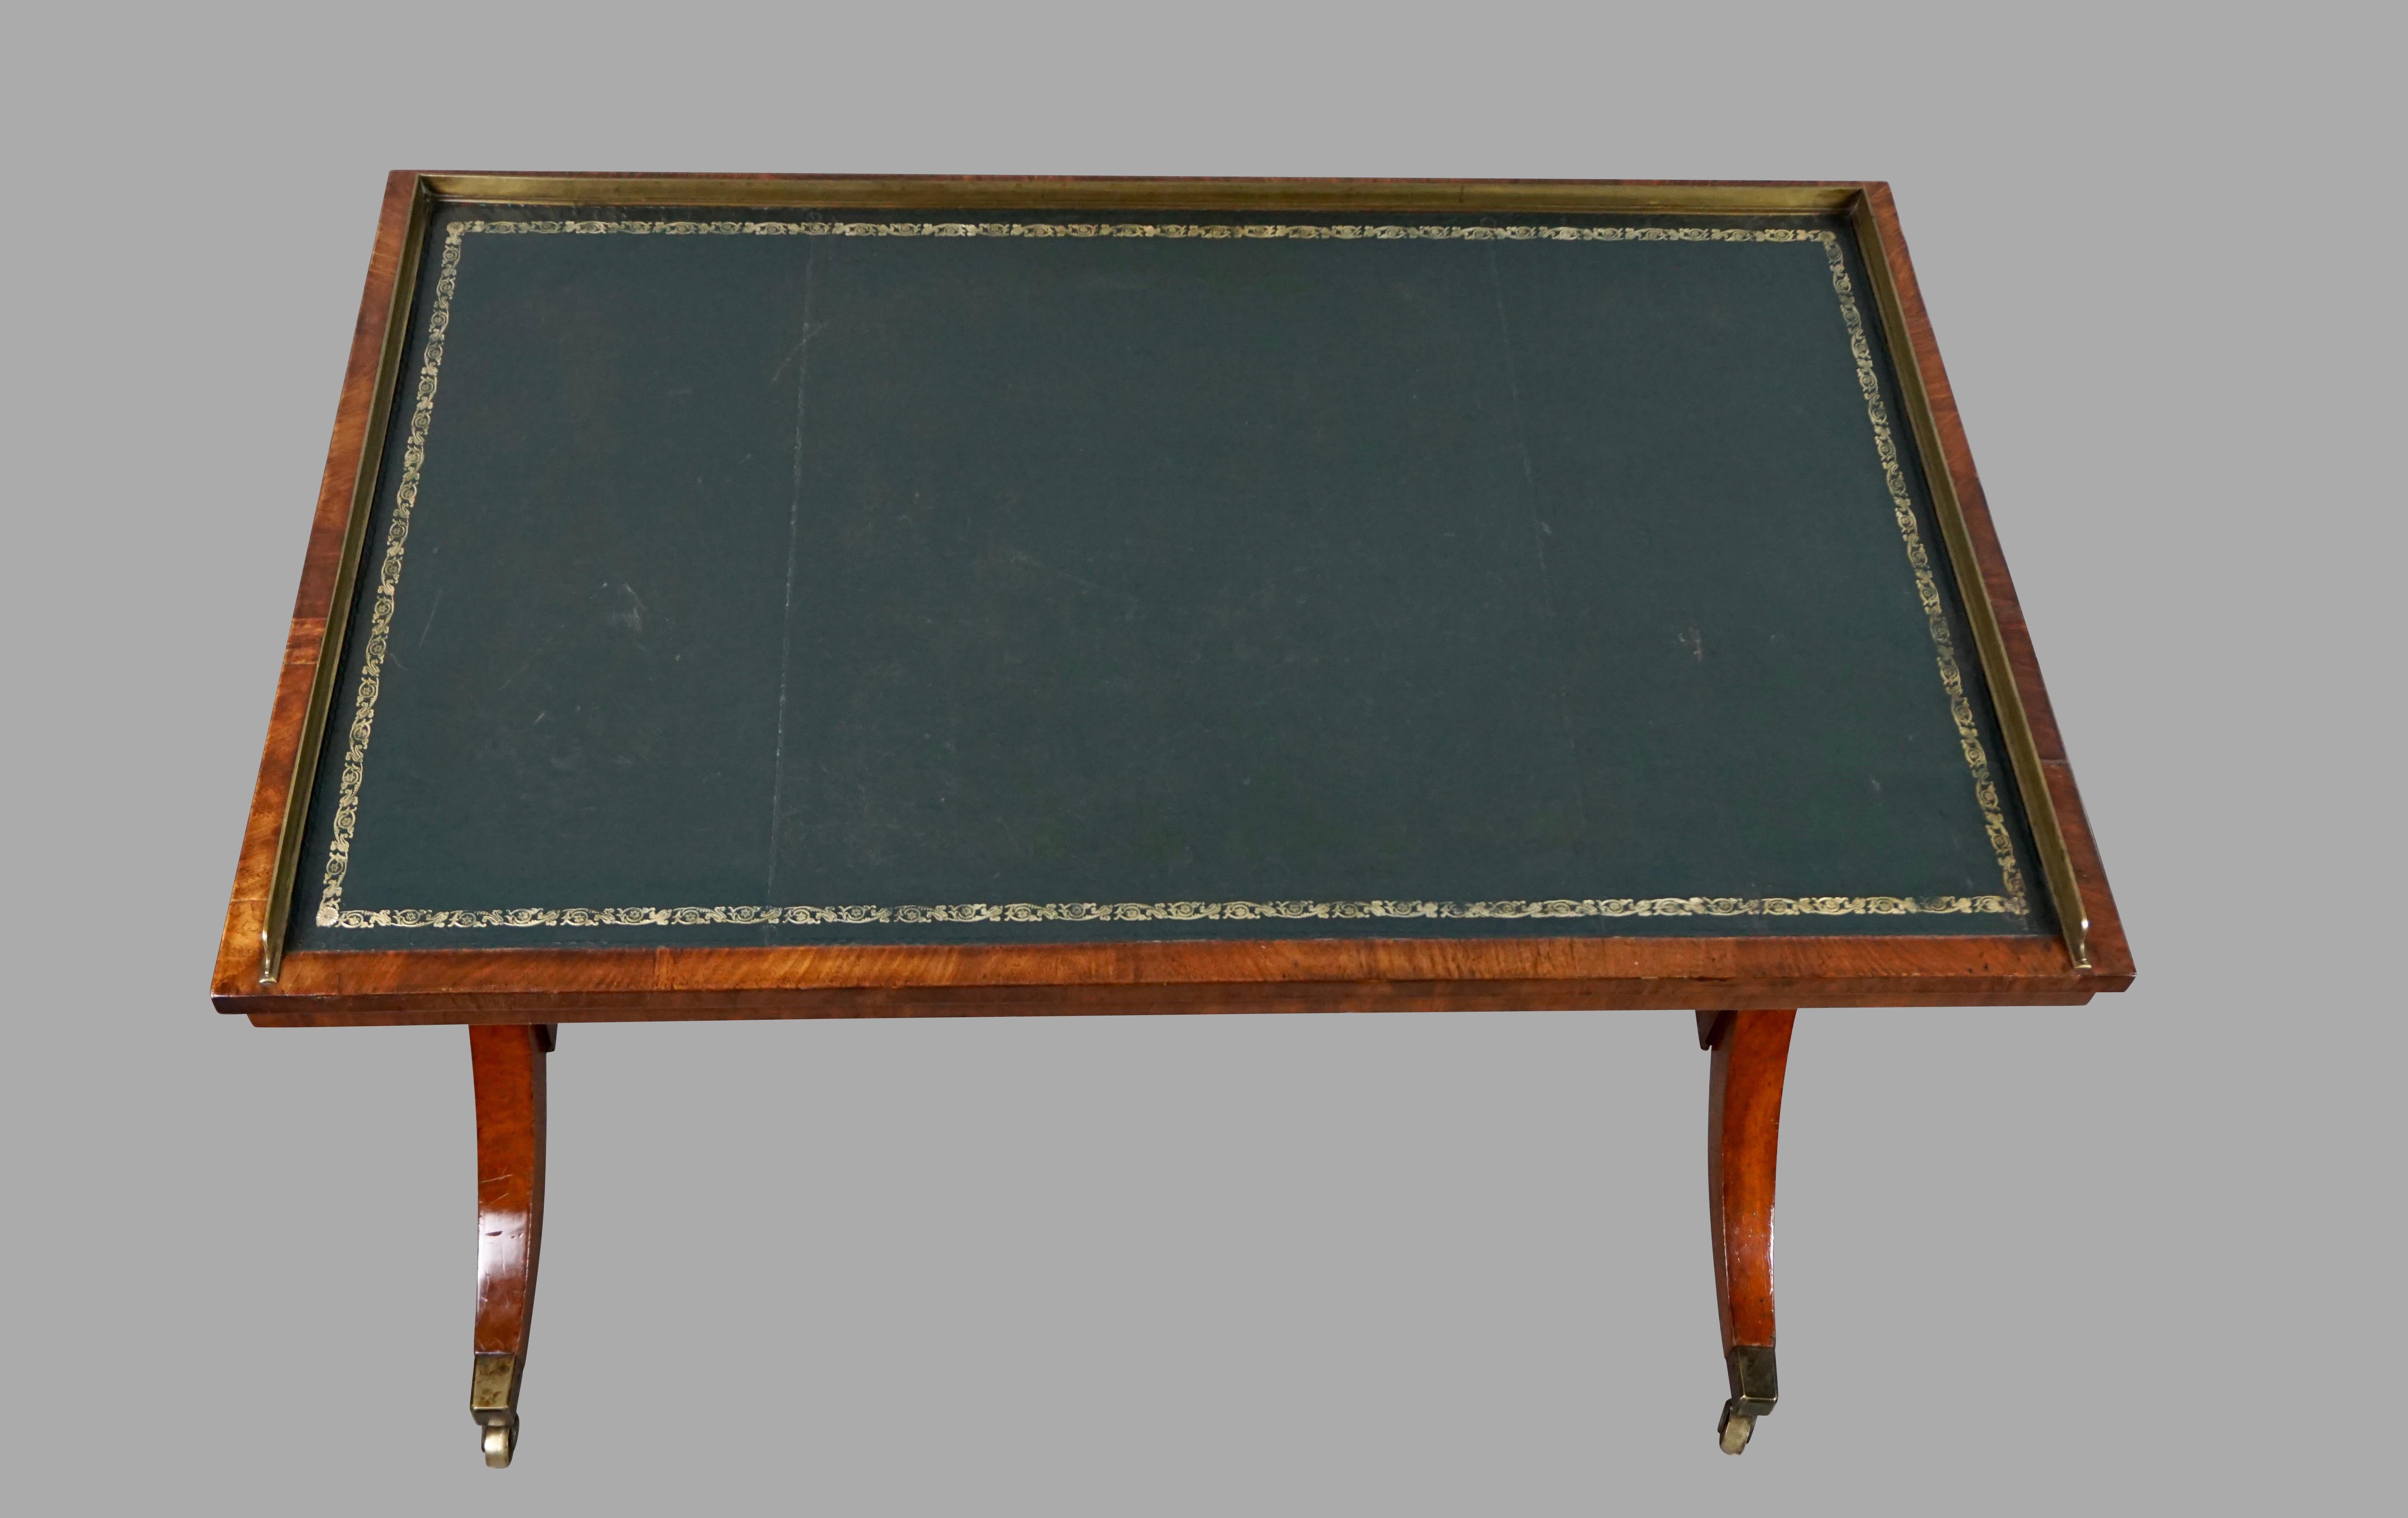 A good quality stylish Regency period mahogany writing table of small size, the gilt-tooled green leather top framed on 3 sides by a brass gallery. The top is supported on standards capped with reeded supports centered by a turned boss terminating